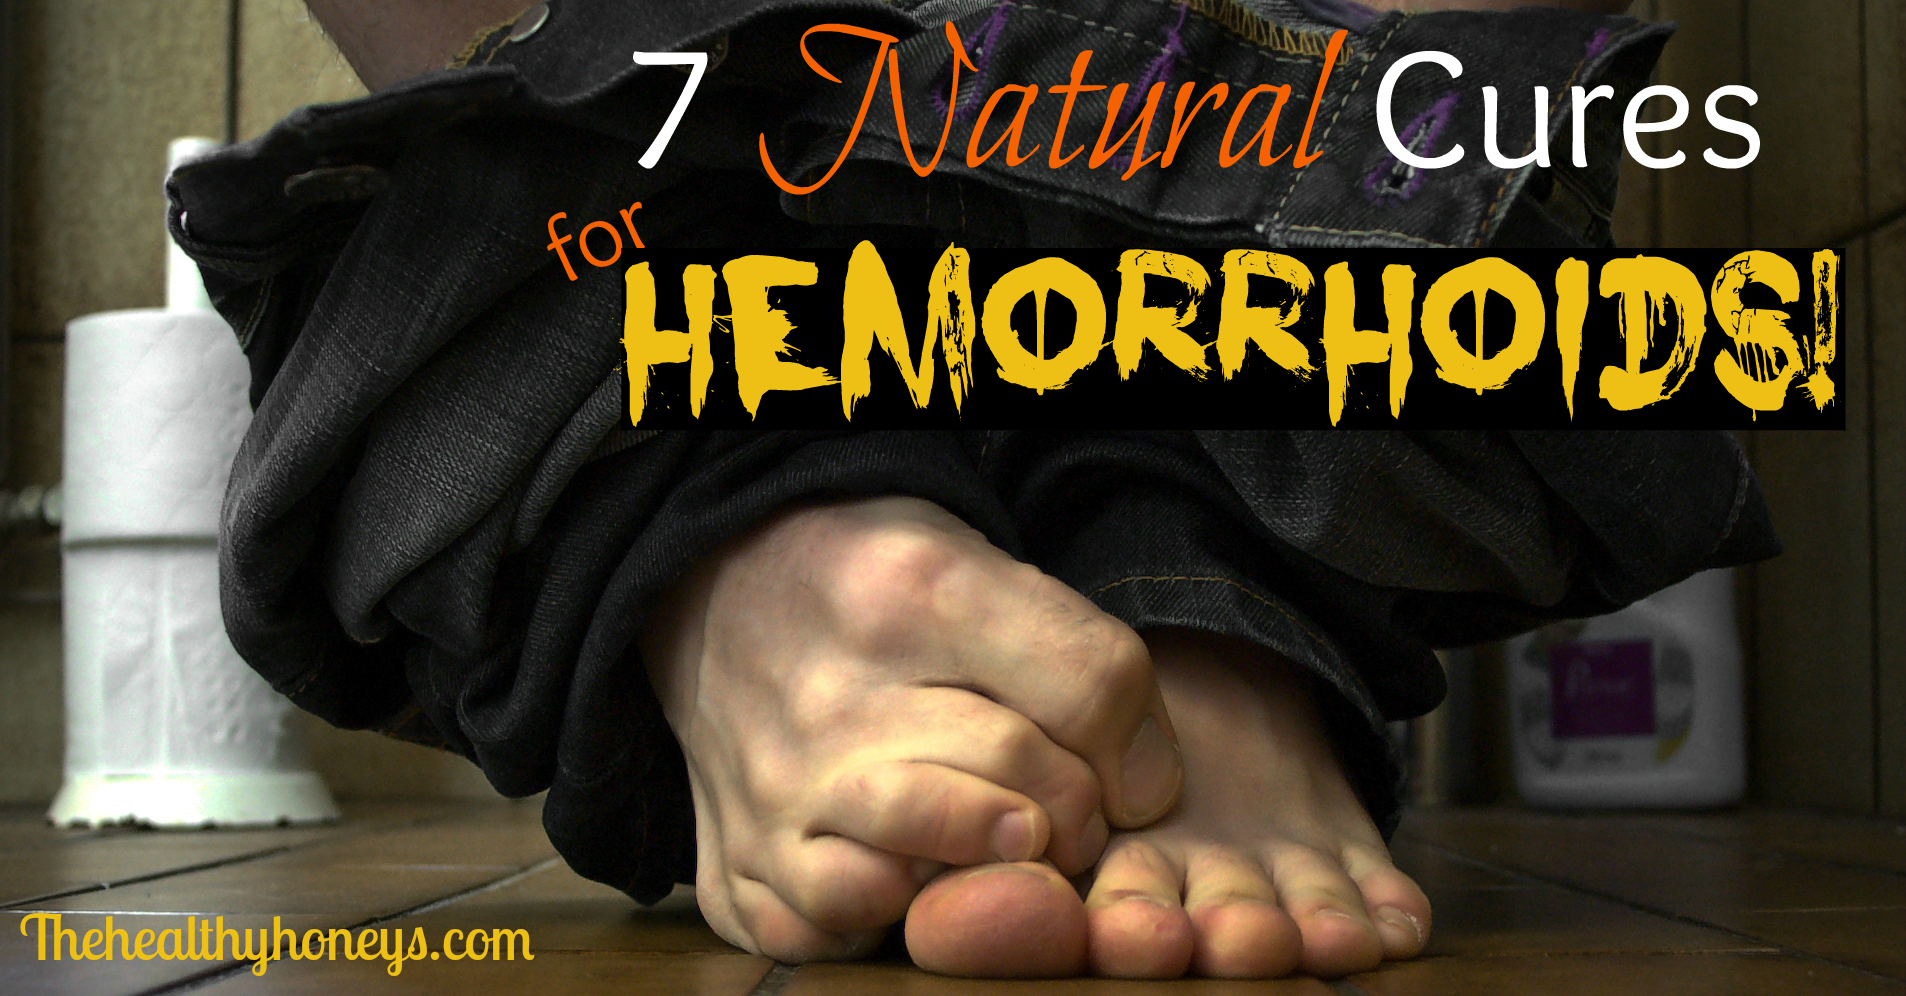 7 Natural Cures for Hemorrhoids!